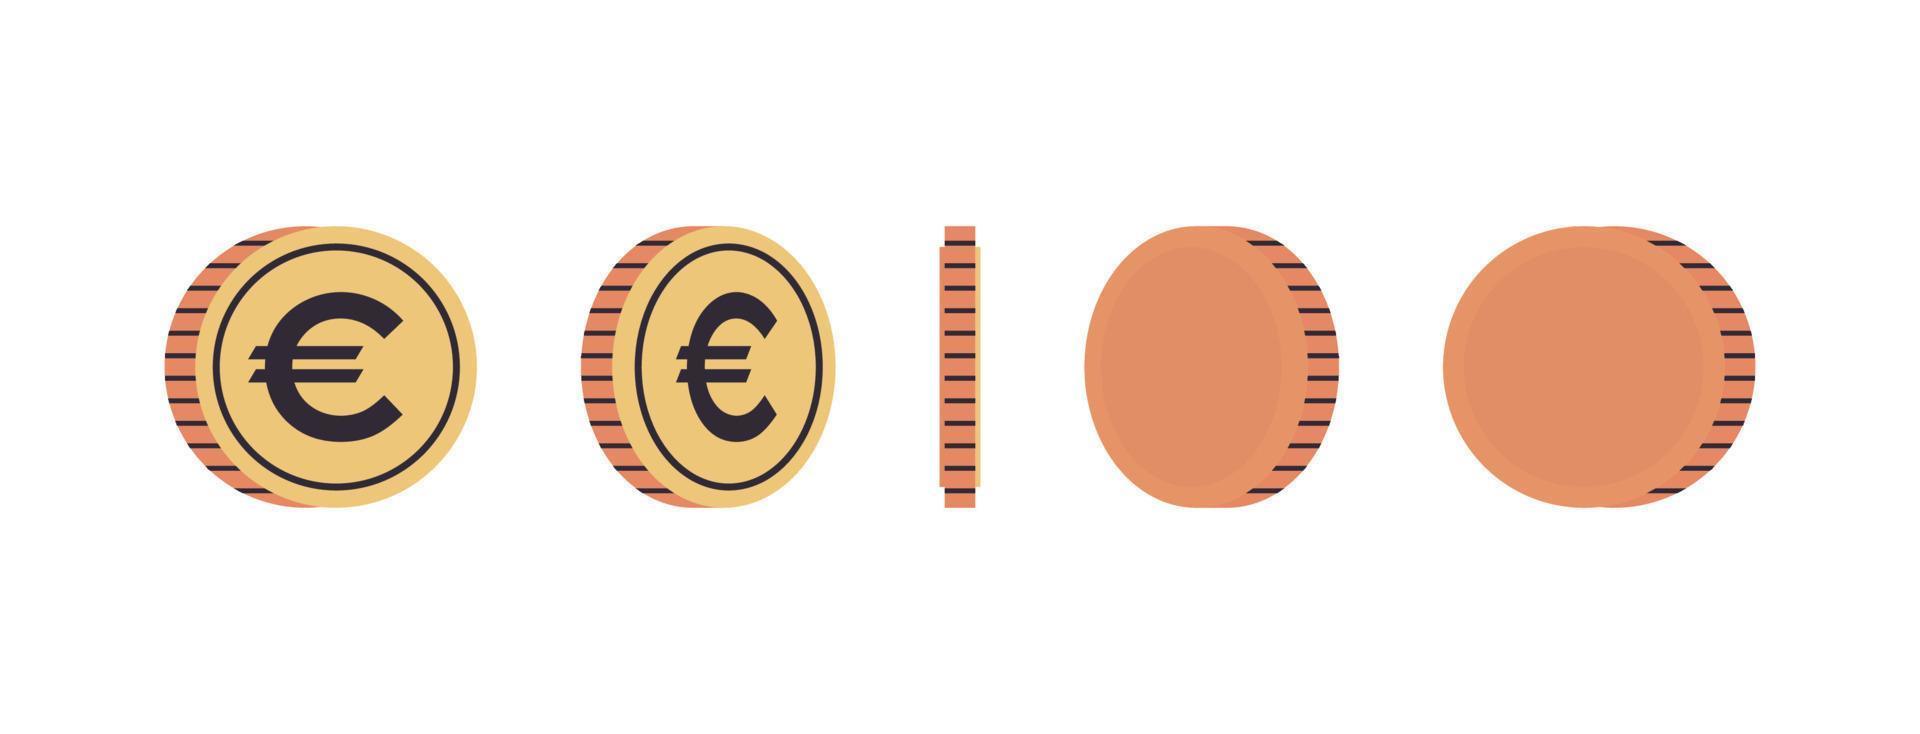 International currency coins and gold coins at different agles of rotation concept full length flat vector illustration.